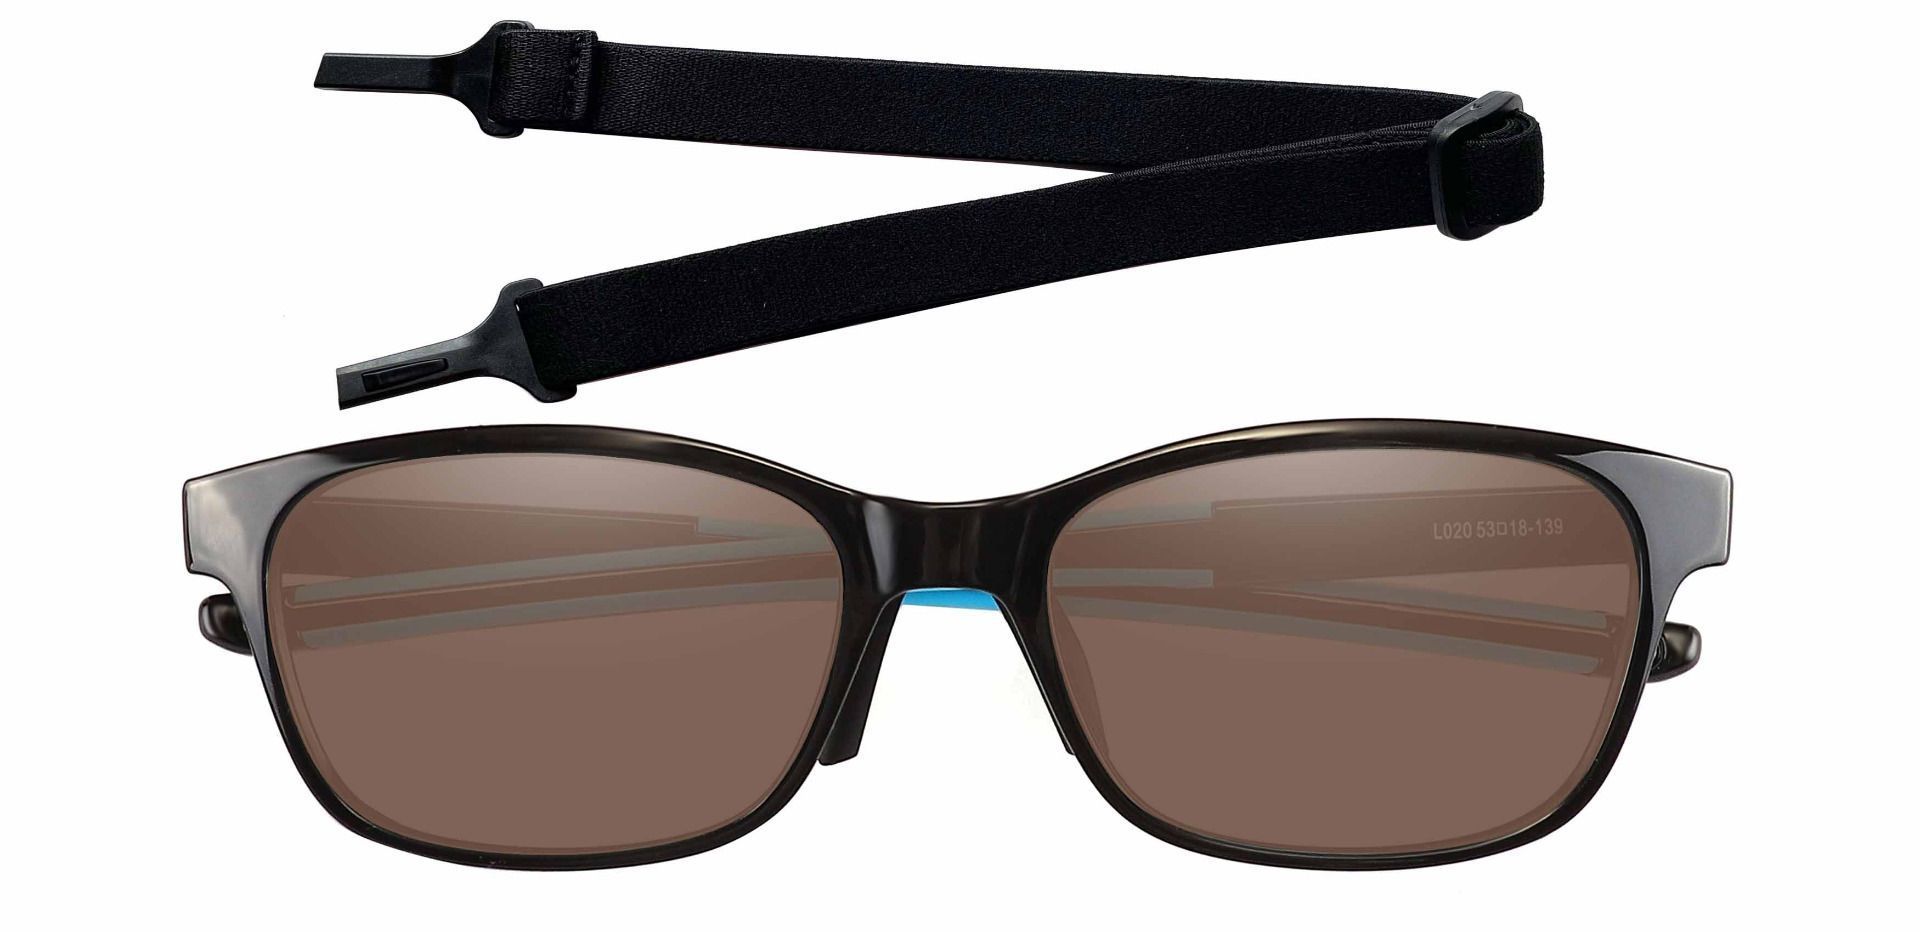 Higgins Rectangle Non-Rx Sunglasses - Black Frame With Brown Lenses